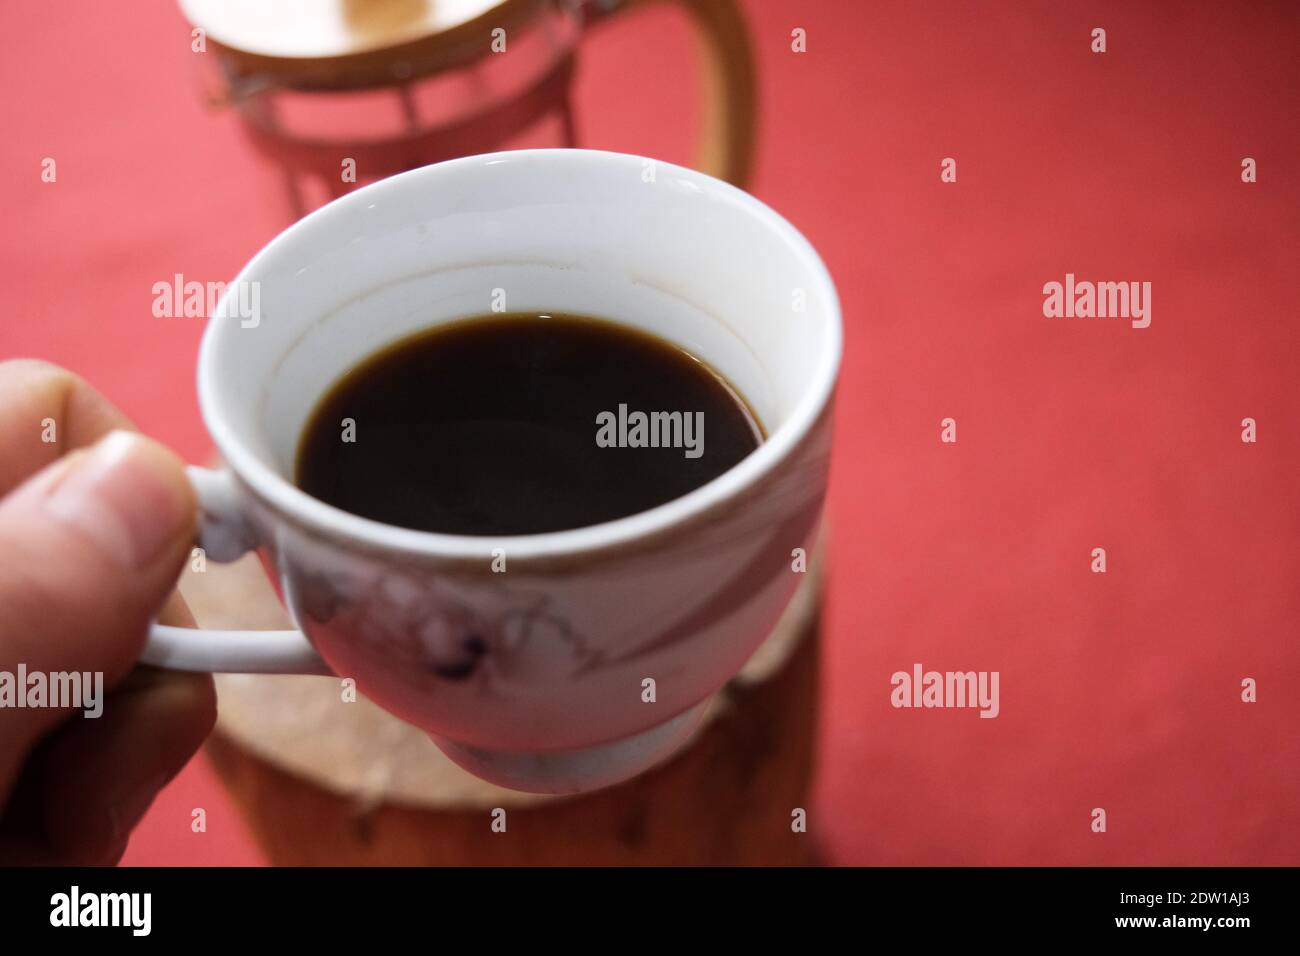 A pot of coffee holding by hand and french press and red carpet background. Stock Photo